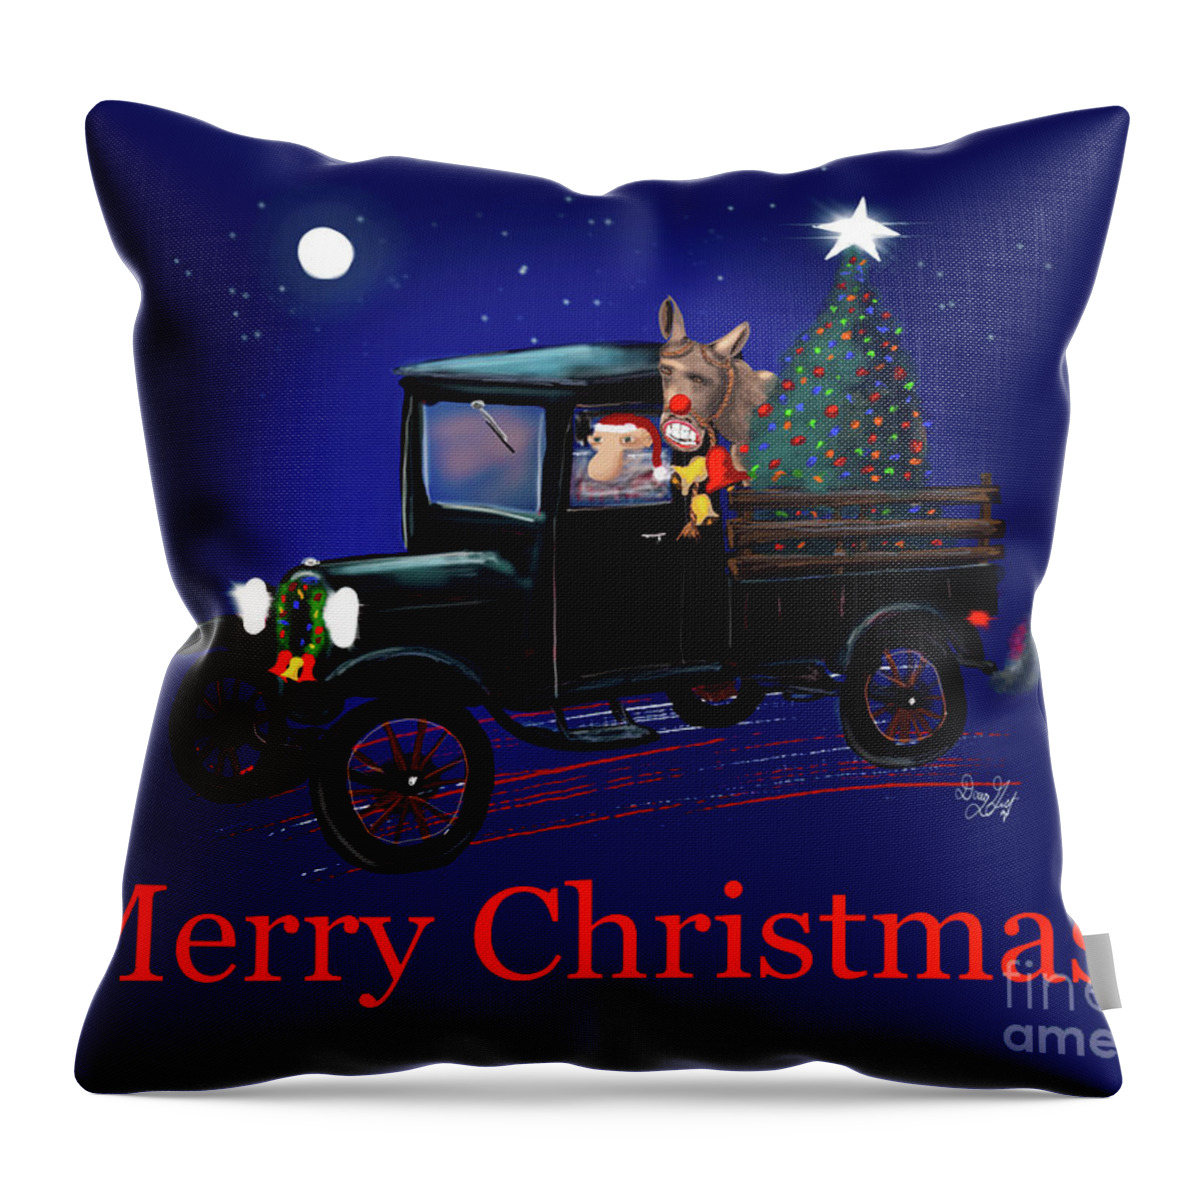 Santa Throw Pillow featuring the digital art Country Christmas by Doug Gist